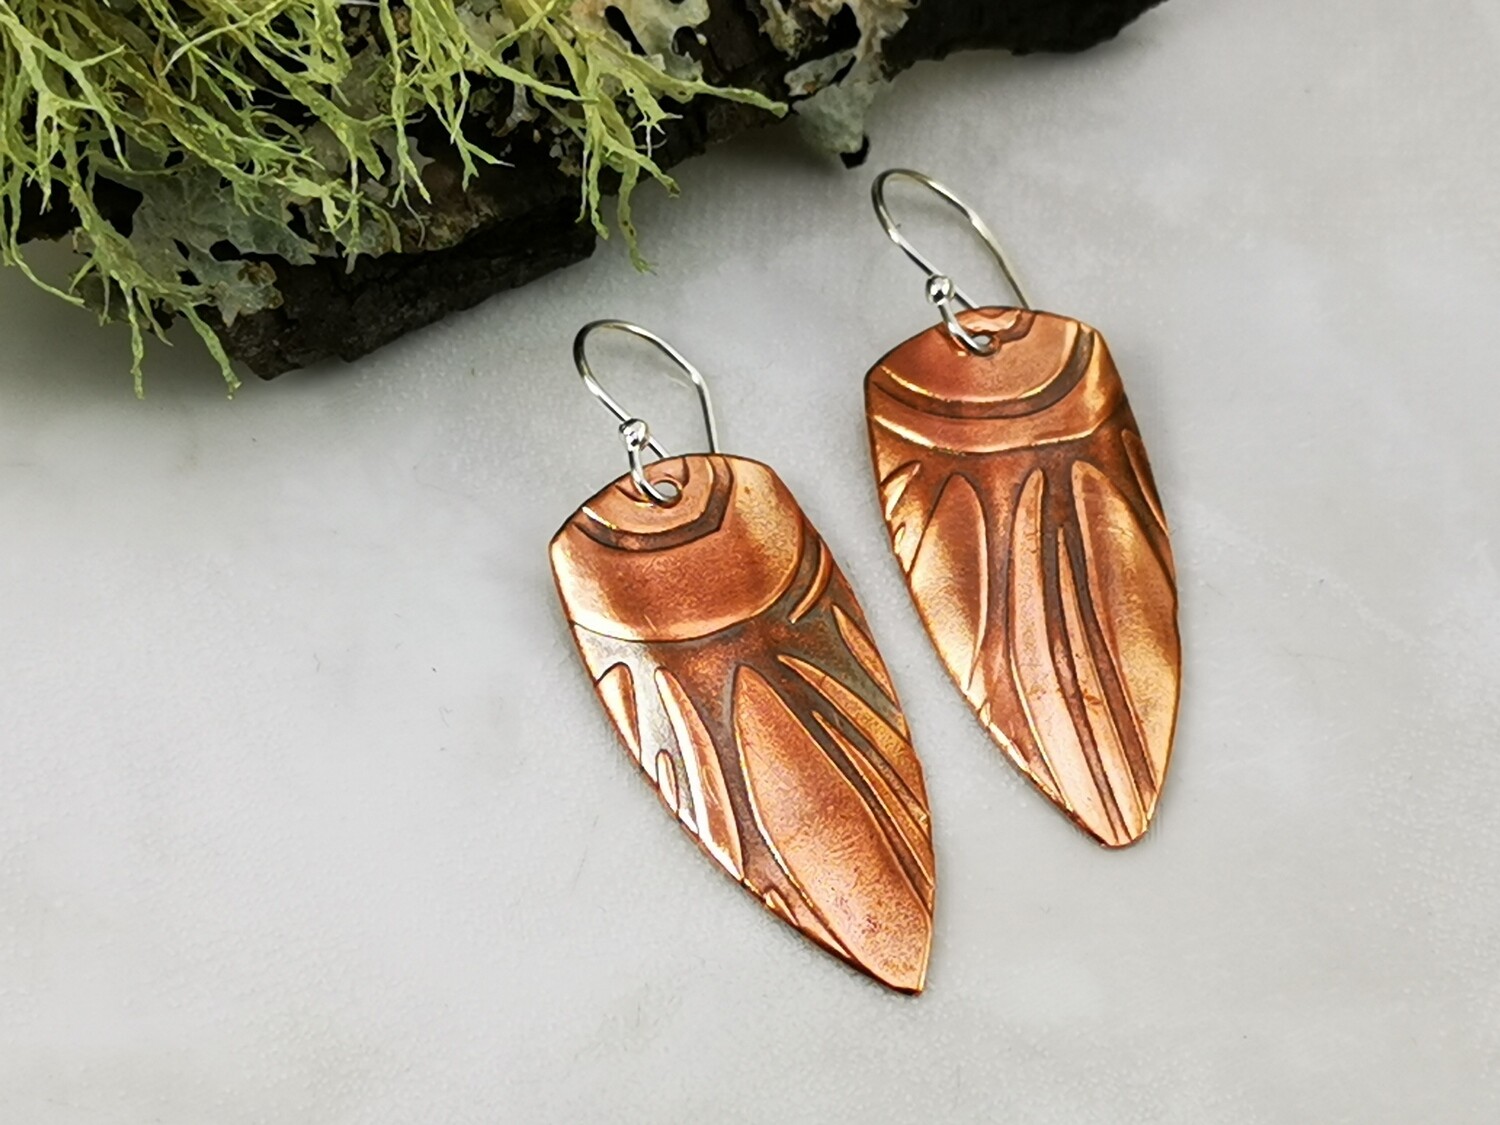 Flower Petals, Patterned Earrings, Copper Jewelry, Handmade, Patterned Copper, Patterned Metal, Dangle Earrings, One of a Kind, Gifts for Her